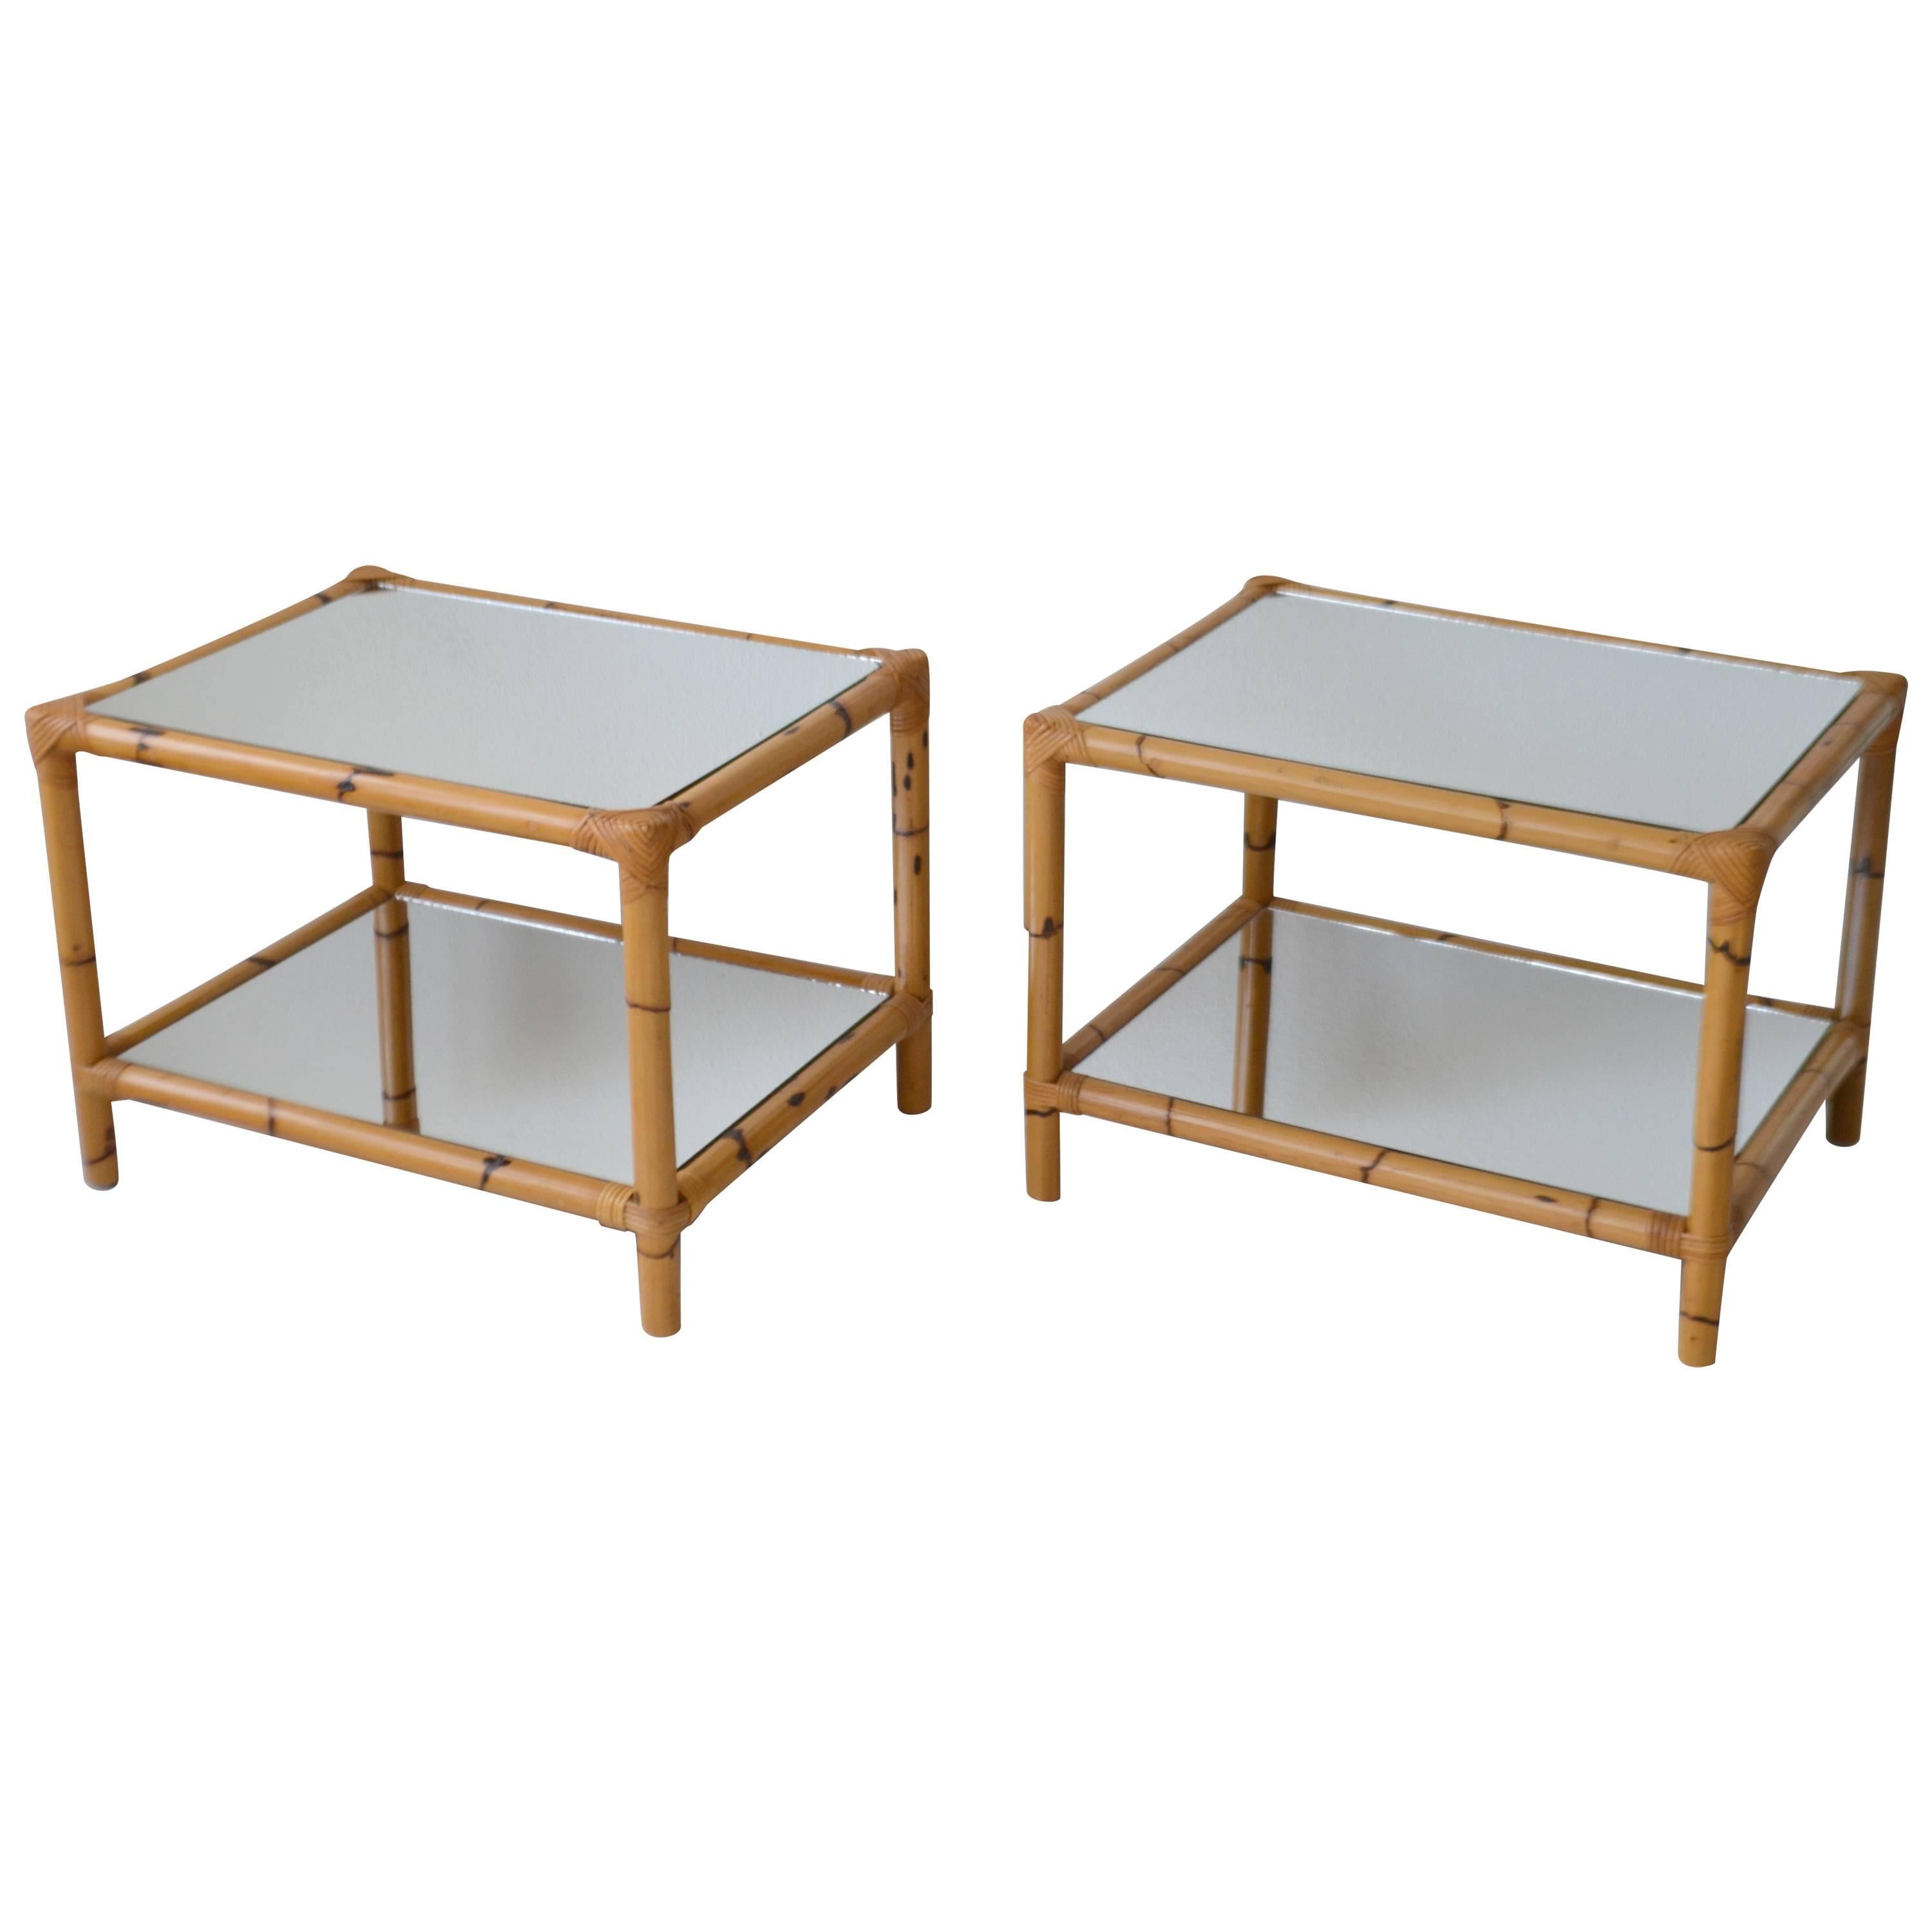 Pair of Midcentury Mirrored Bamboo Two-Tier Side Tables